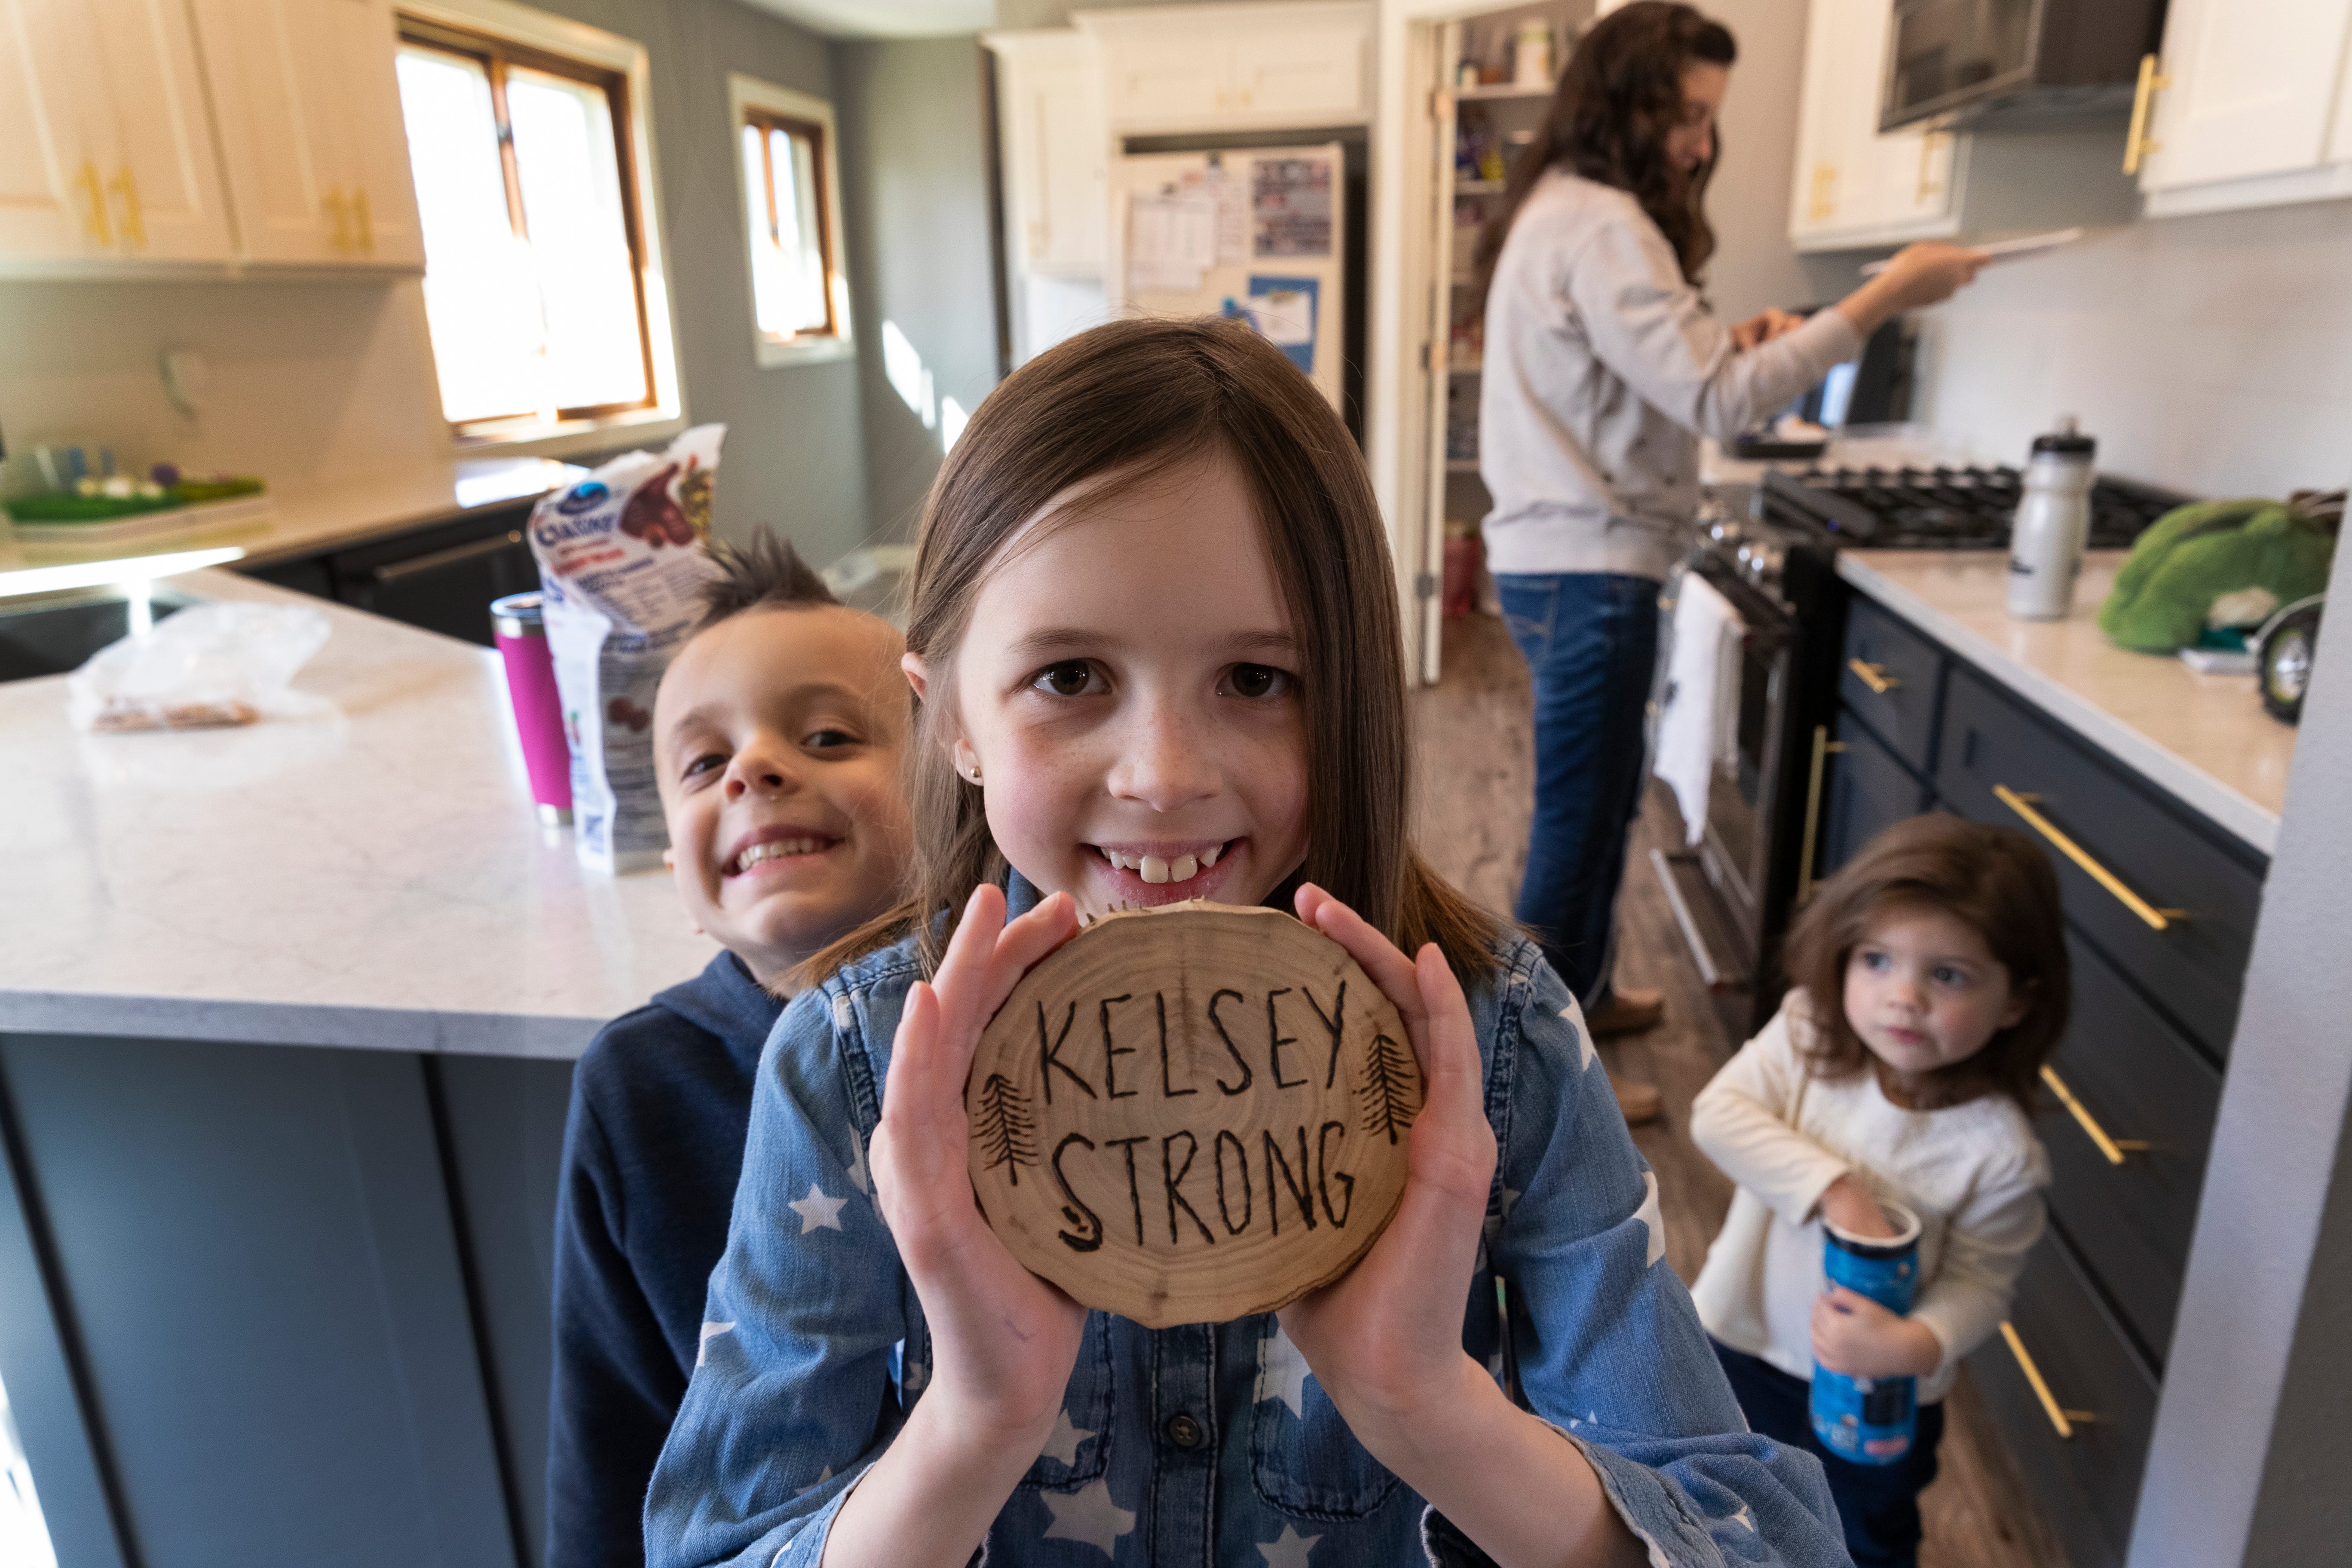 Payton Townsend holds some inspirational artwork made while her mother was hospitalized critically ill with COVID-19. She is shown with siblings Beau, 5, and Faith,1½, at their home in Poynette.